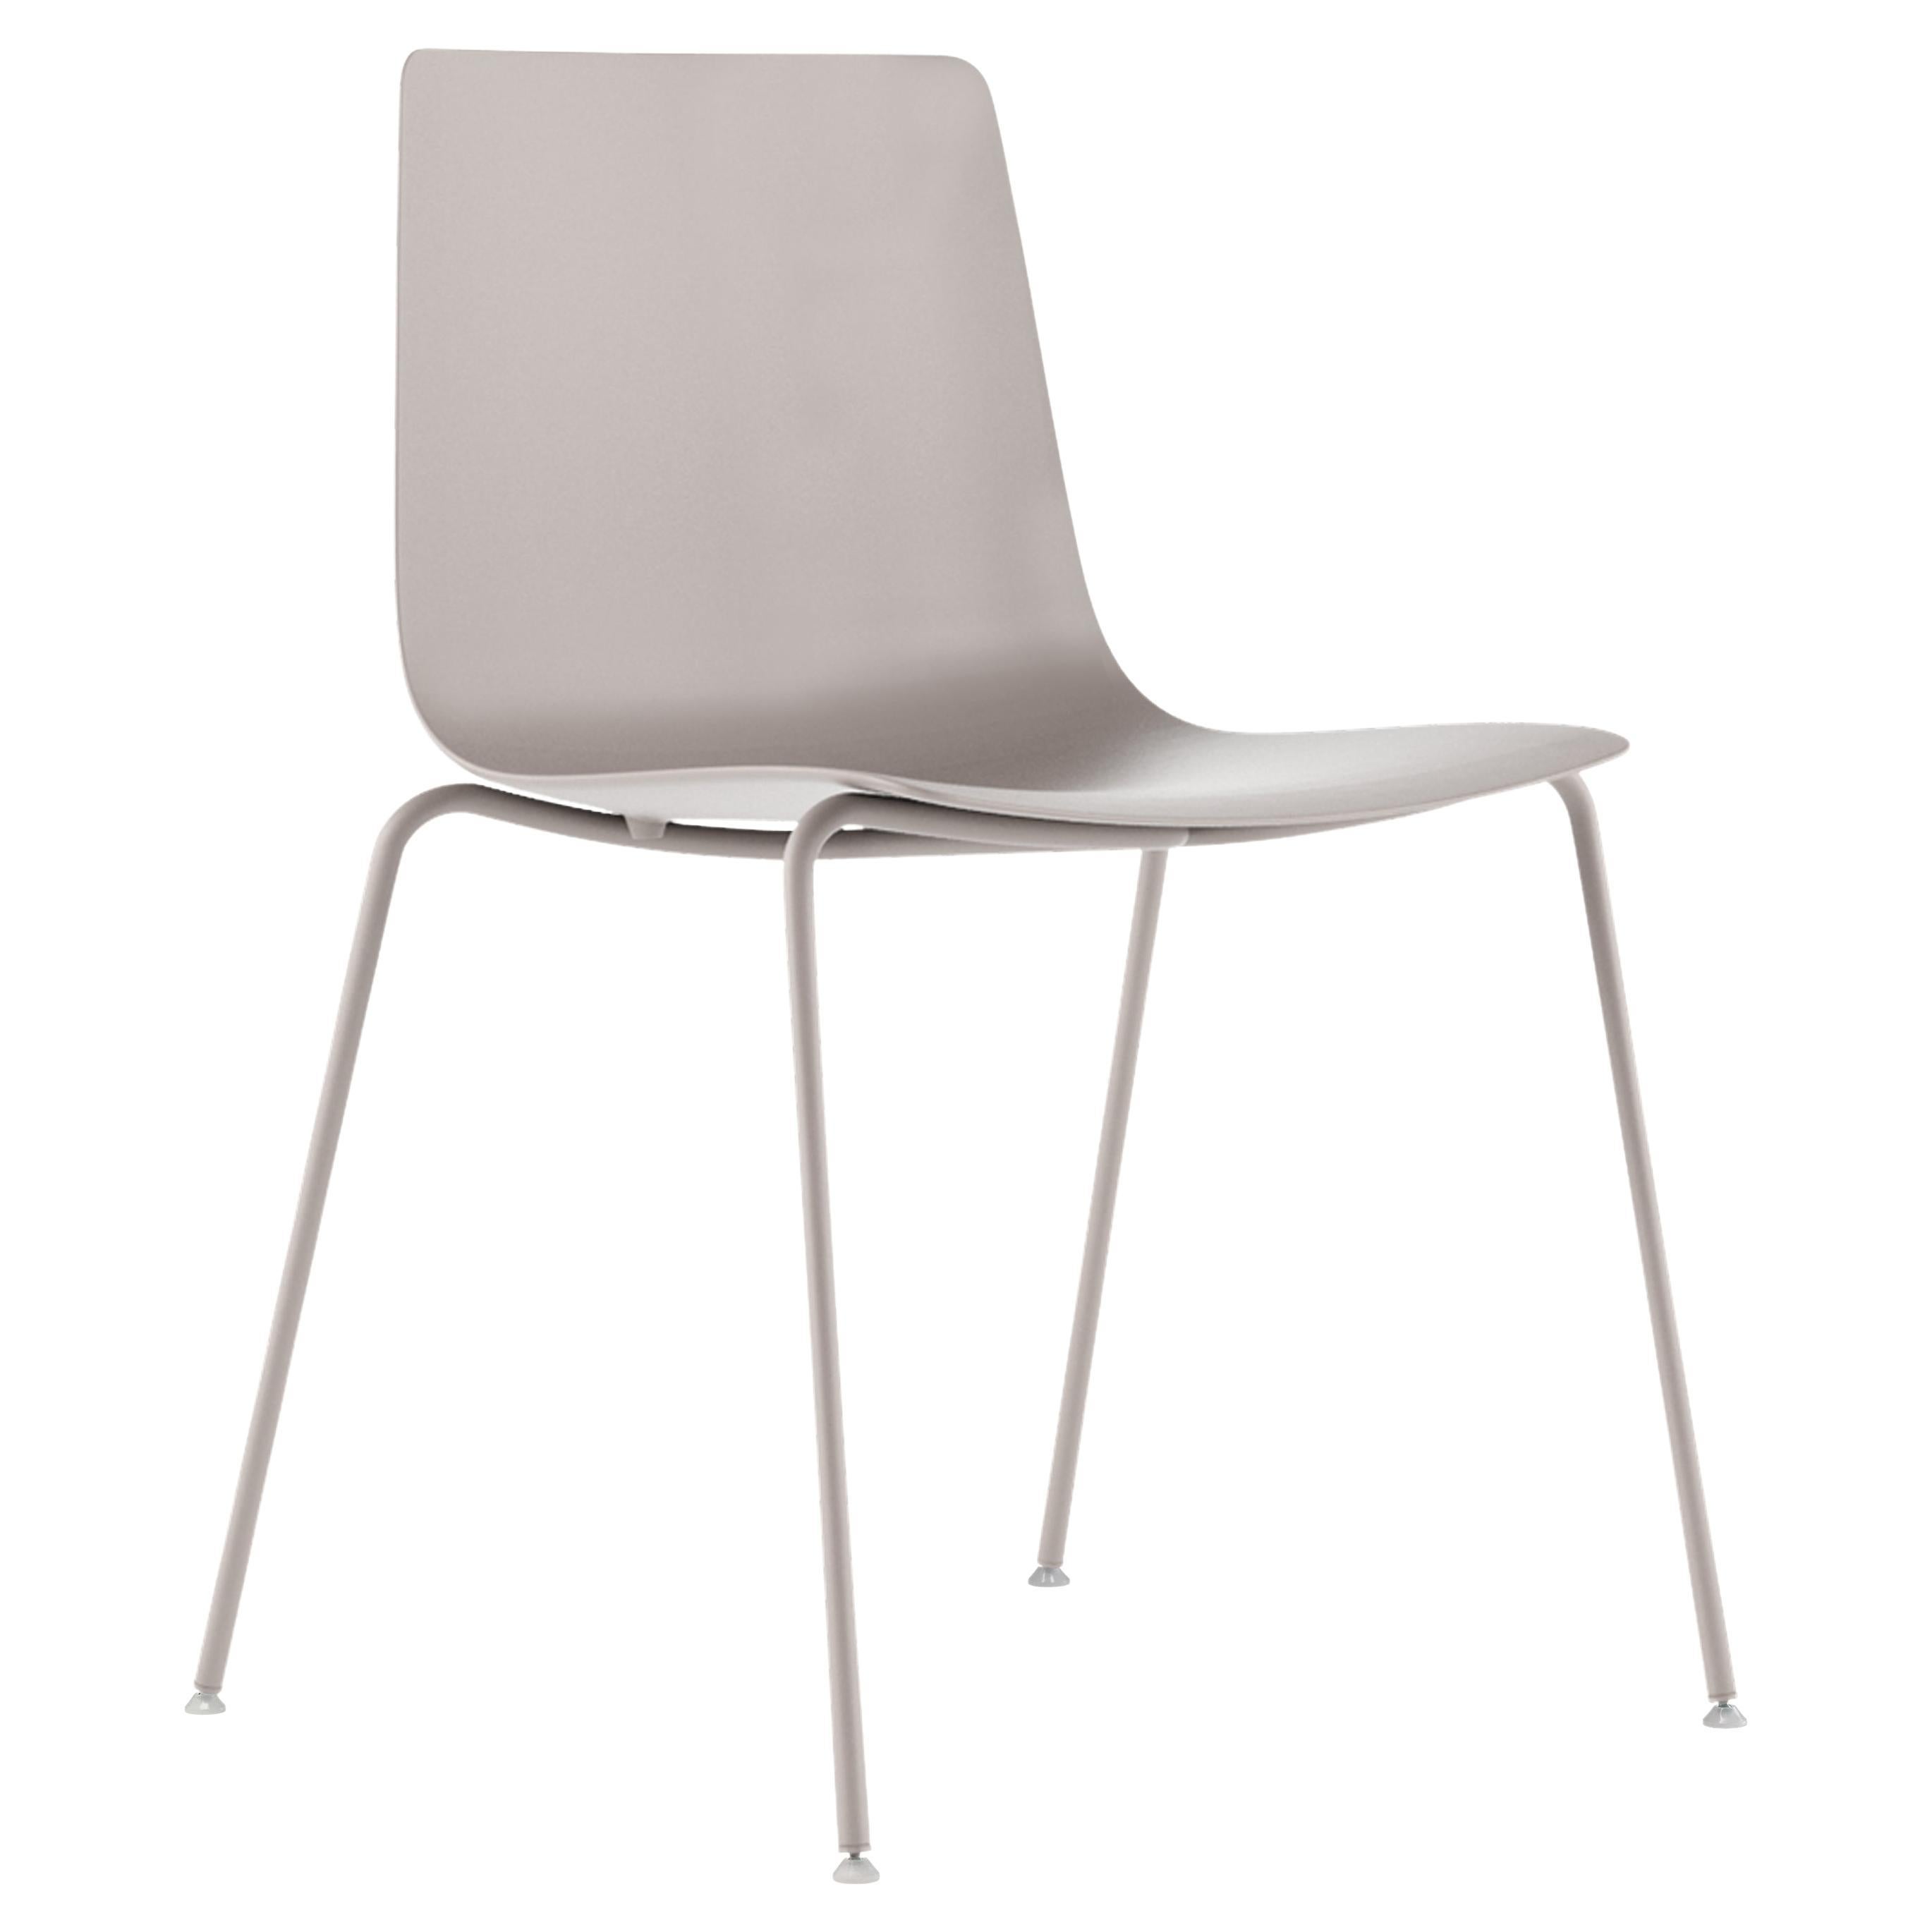 Alias 89C Slim Chair 4 in Sand Polypropylene Seat with Lacquered Steel Frame For Sale